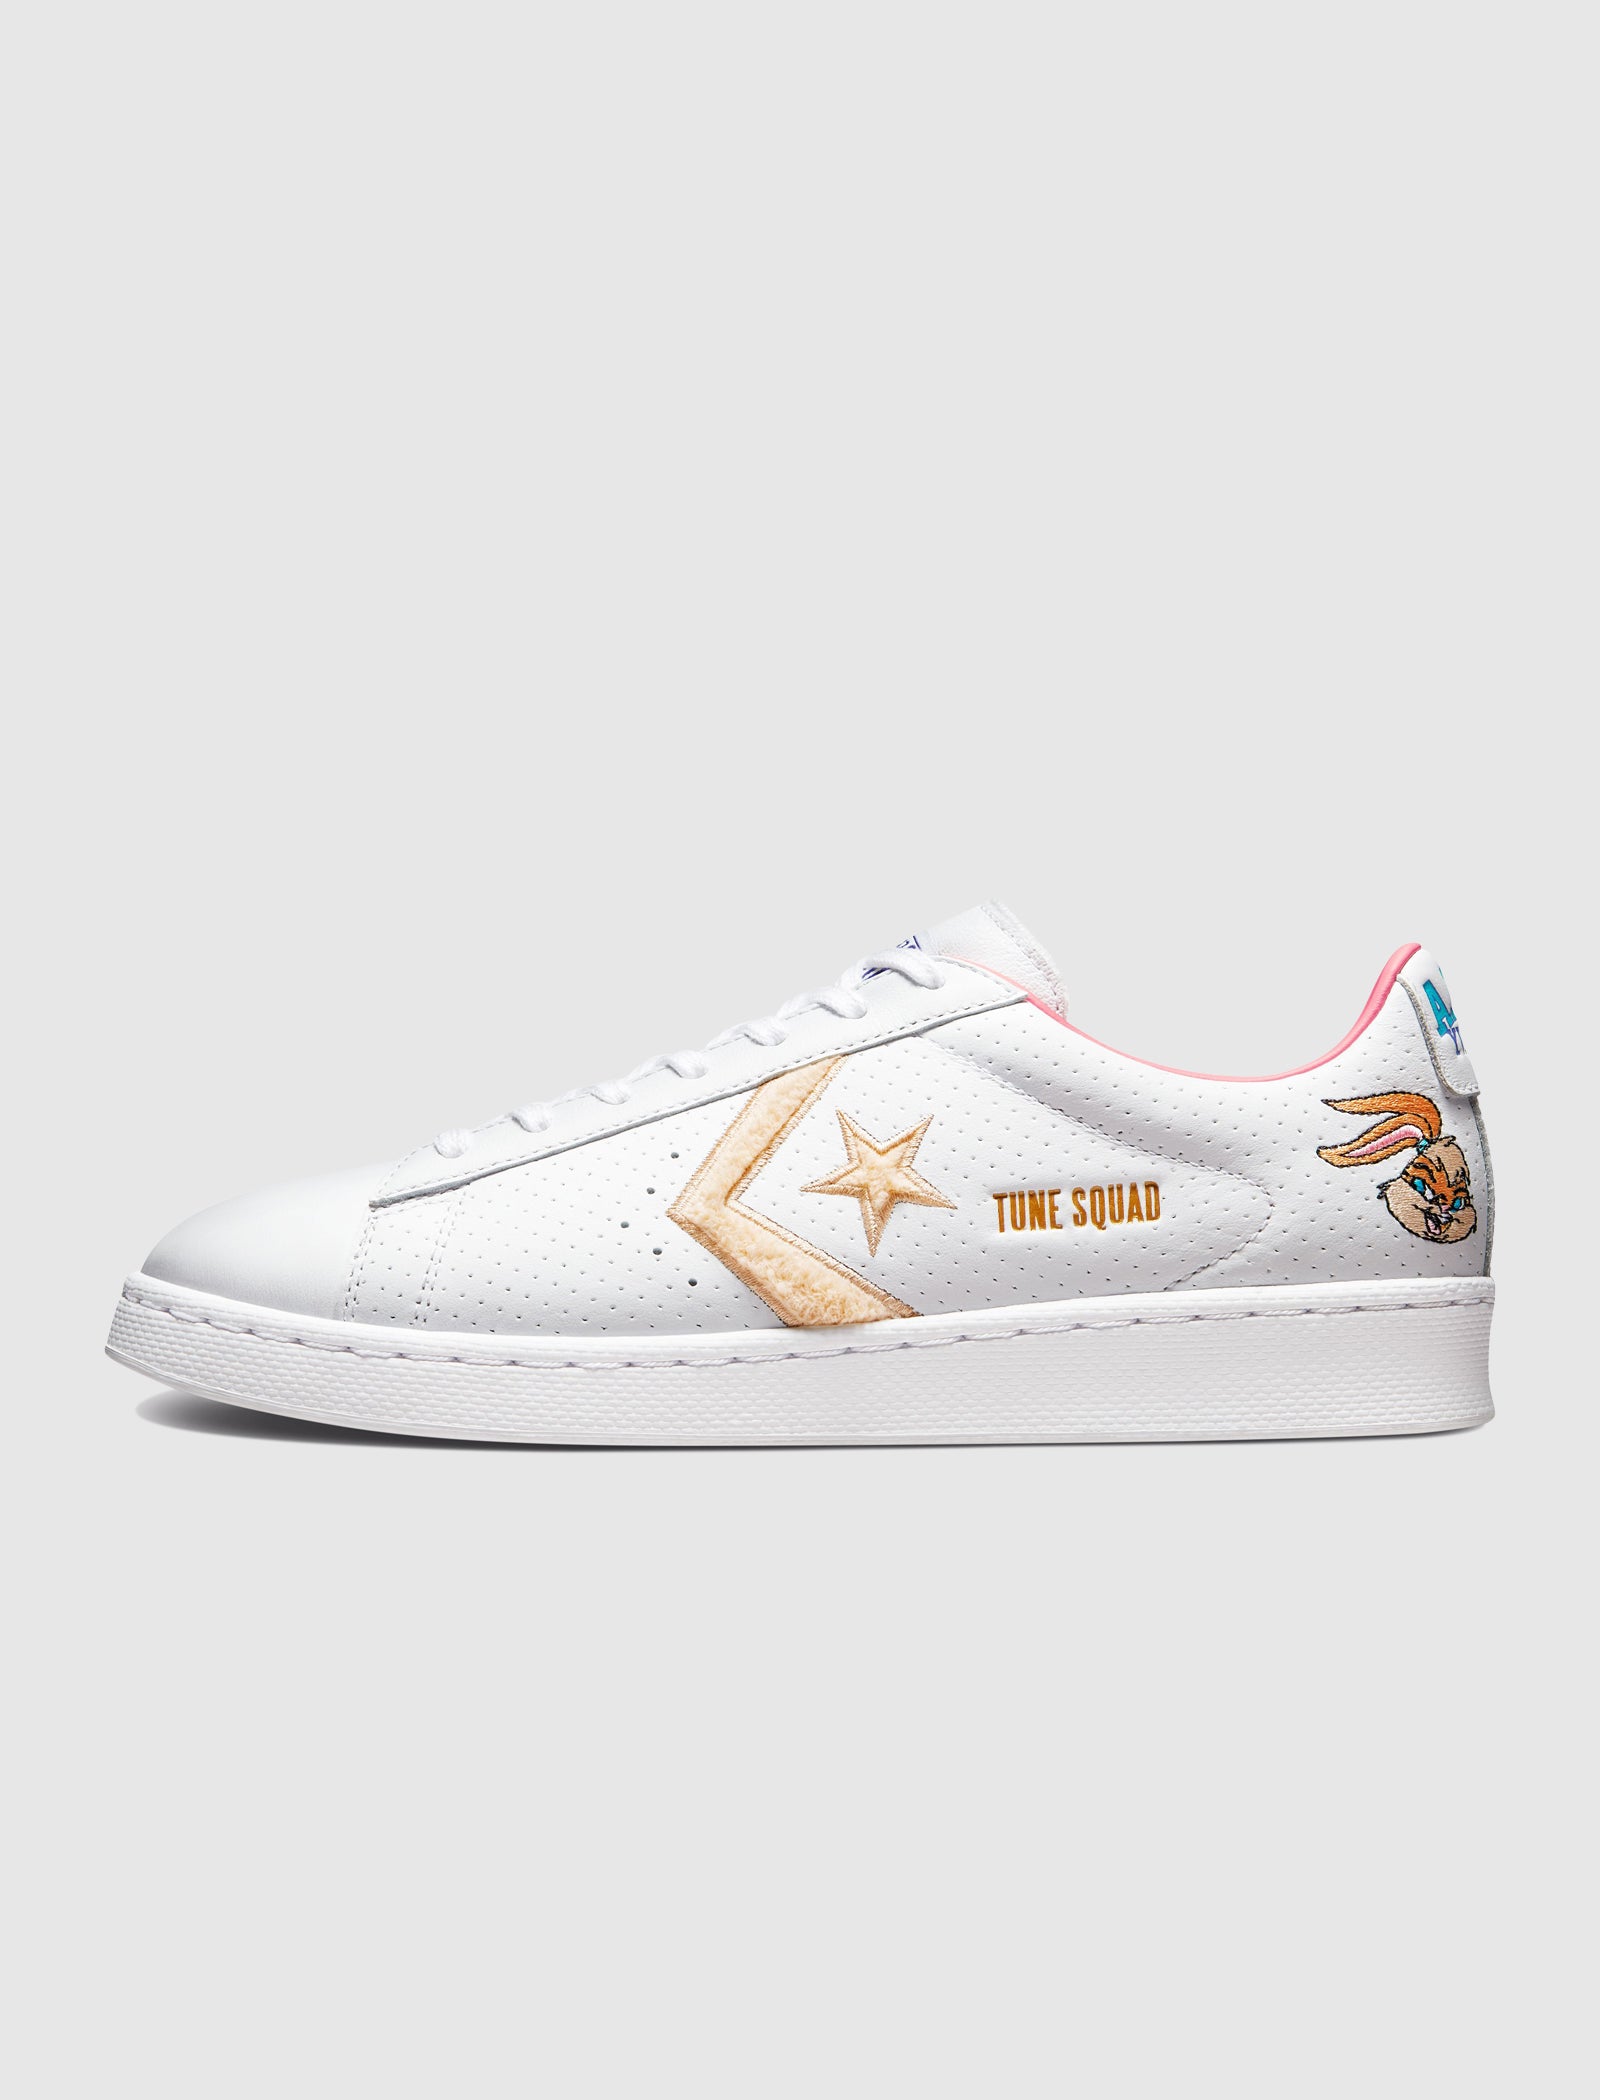 SPACE JAM PRO LEATHER LOW "LOLA"